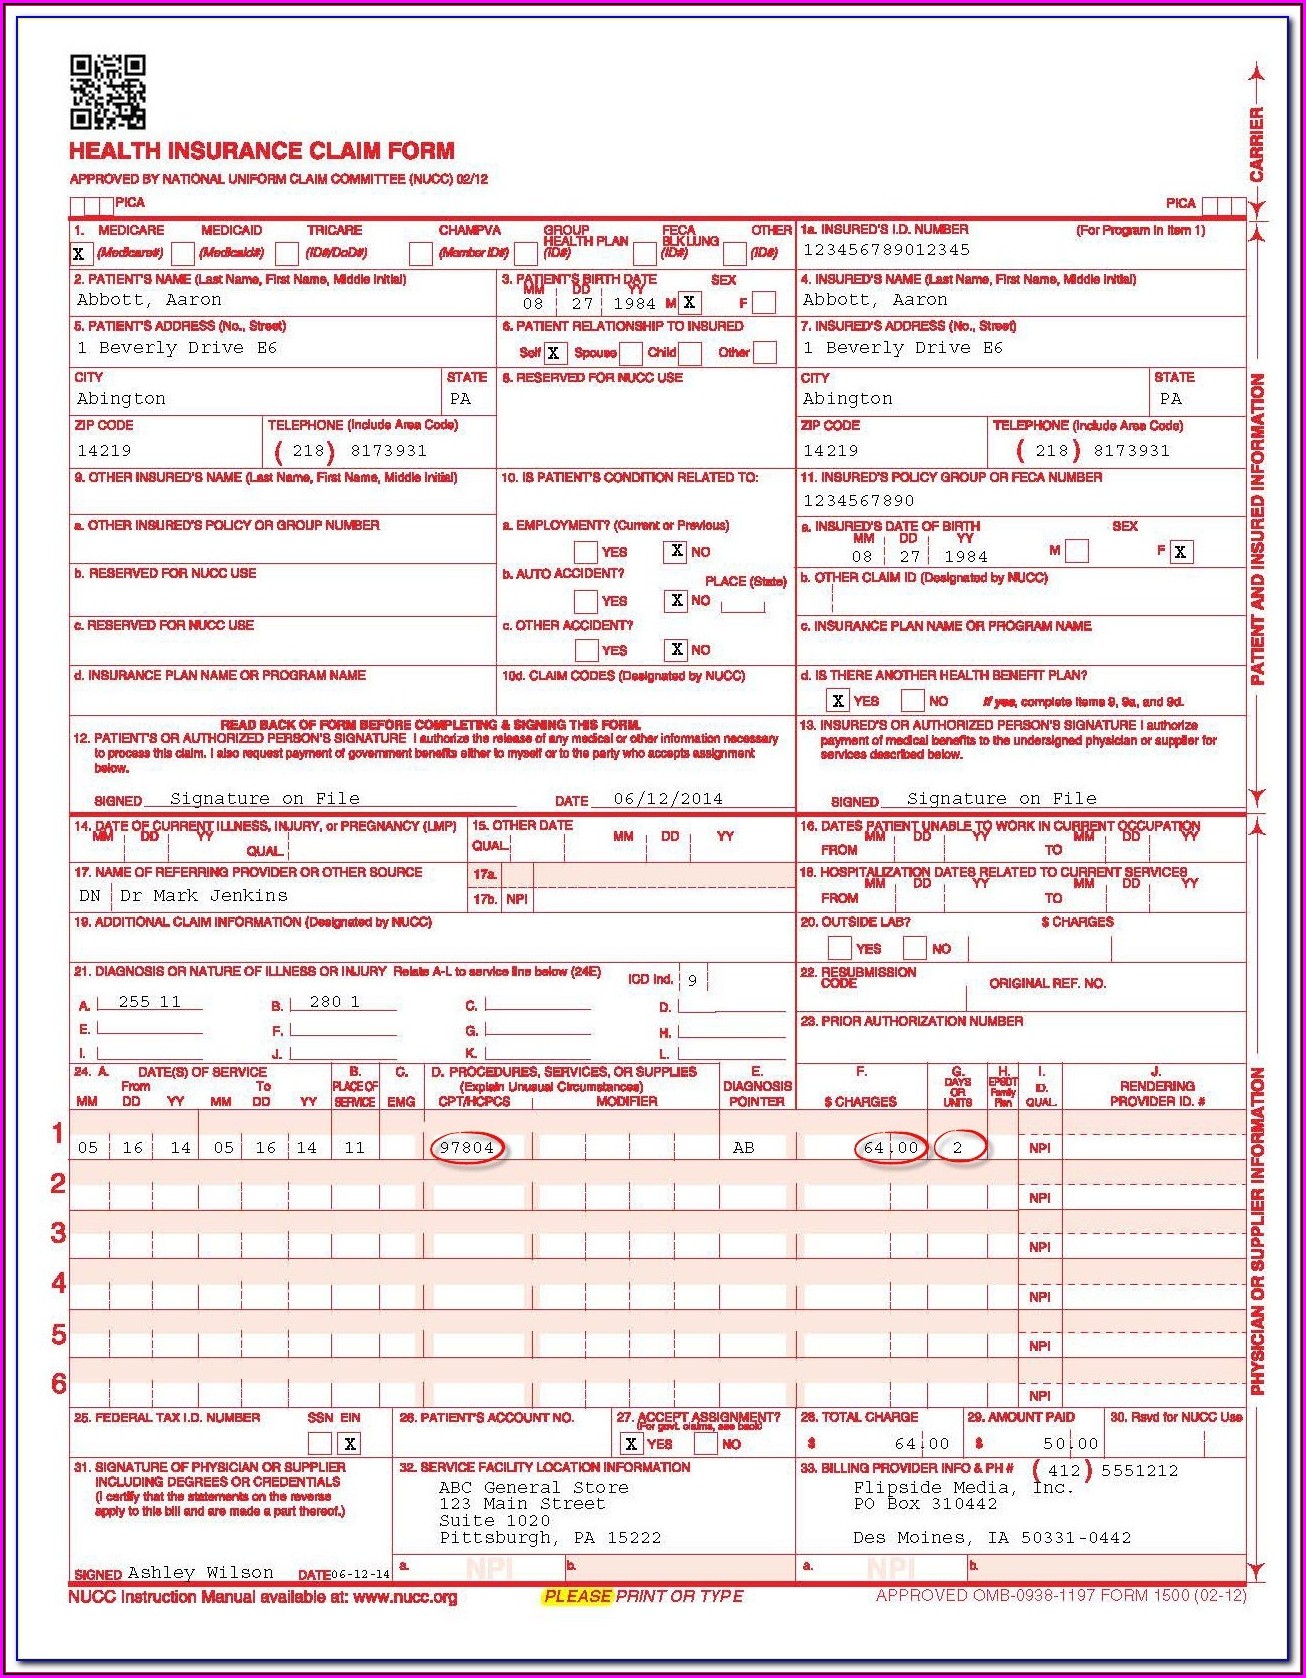 How To Fill Out A Cms 1500 Form Correctly